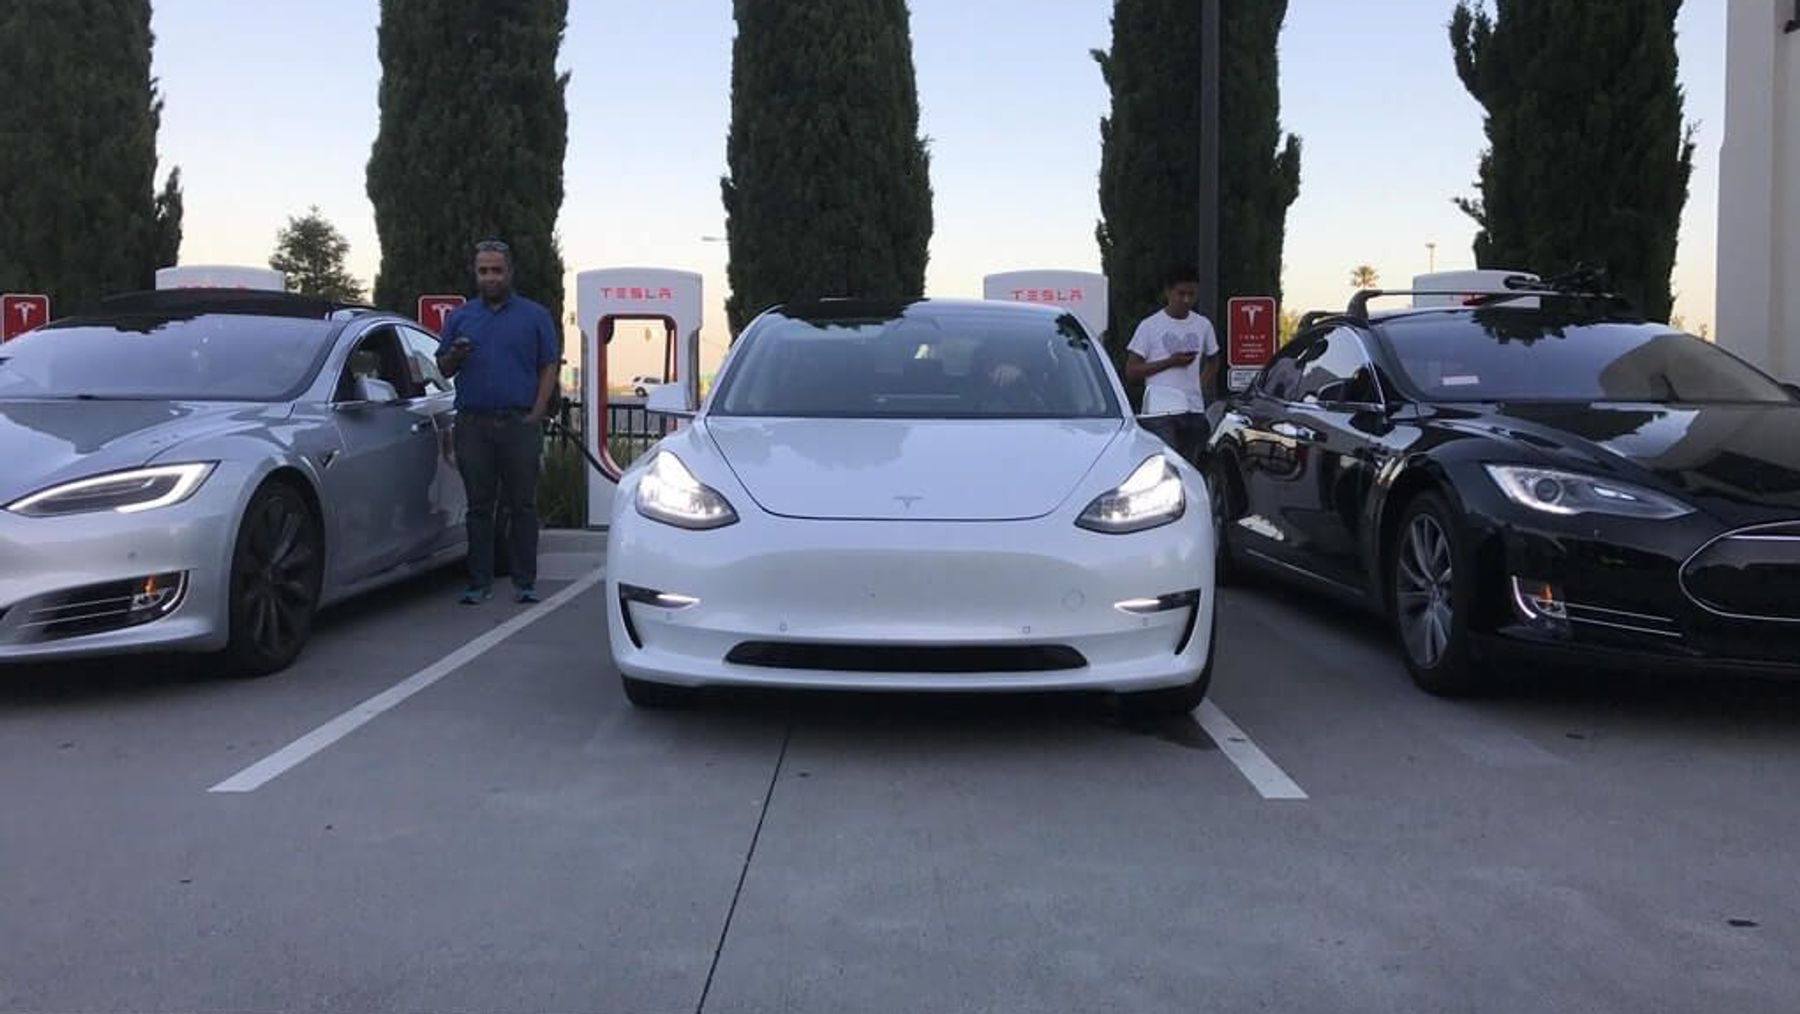 Attackers can crack Teslas in seconds